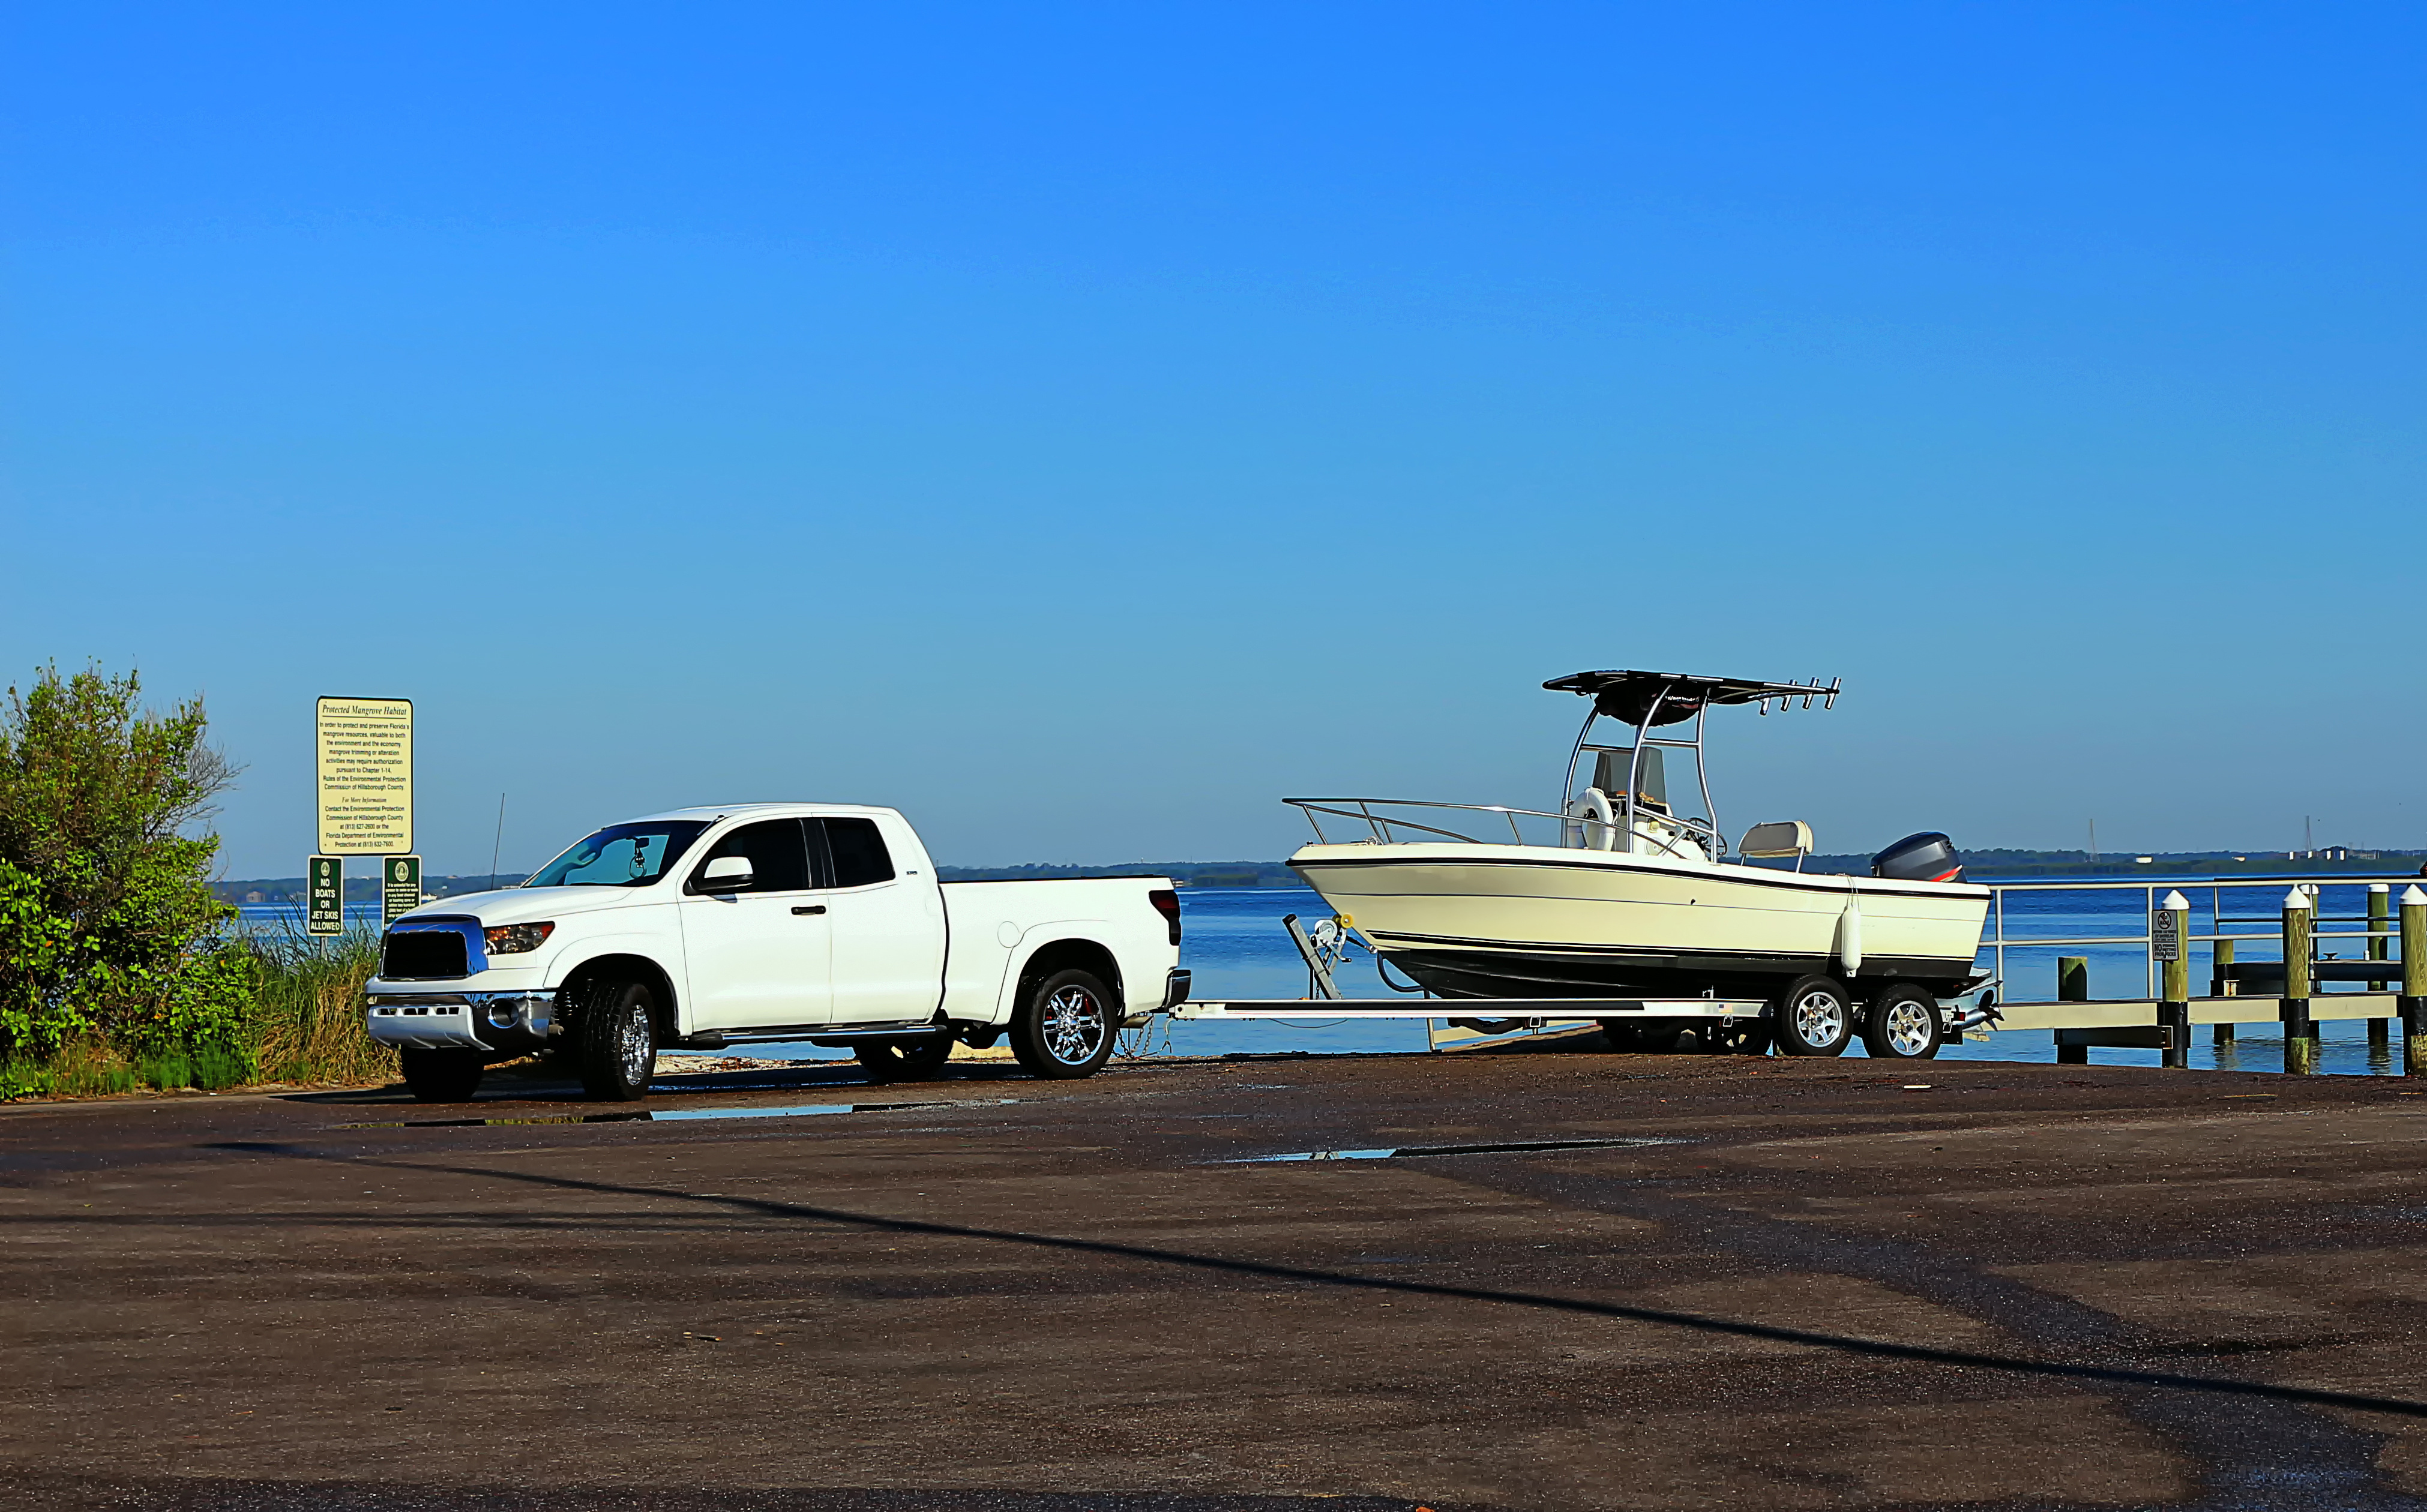 A white passenger truck is parked near the boat loading dock with a boat in tow.